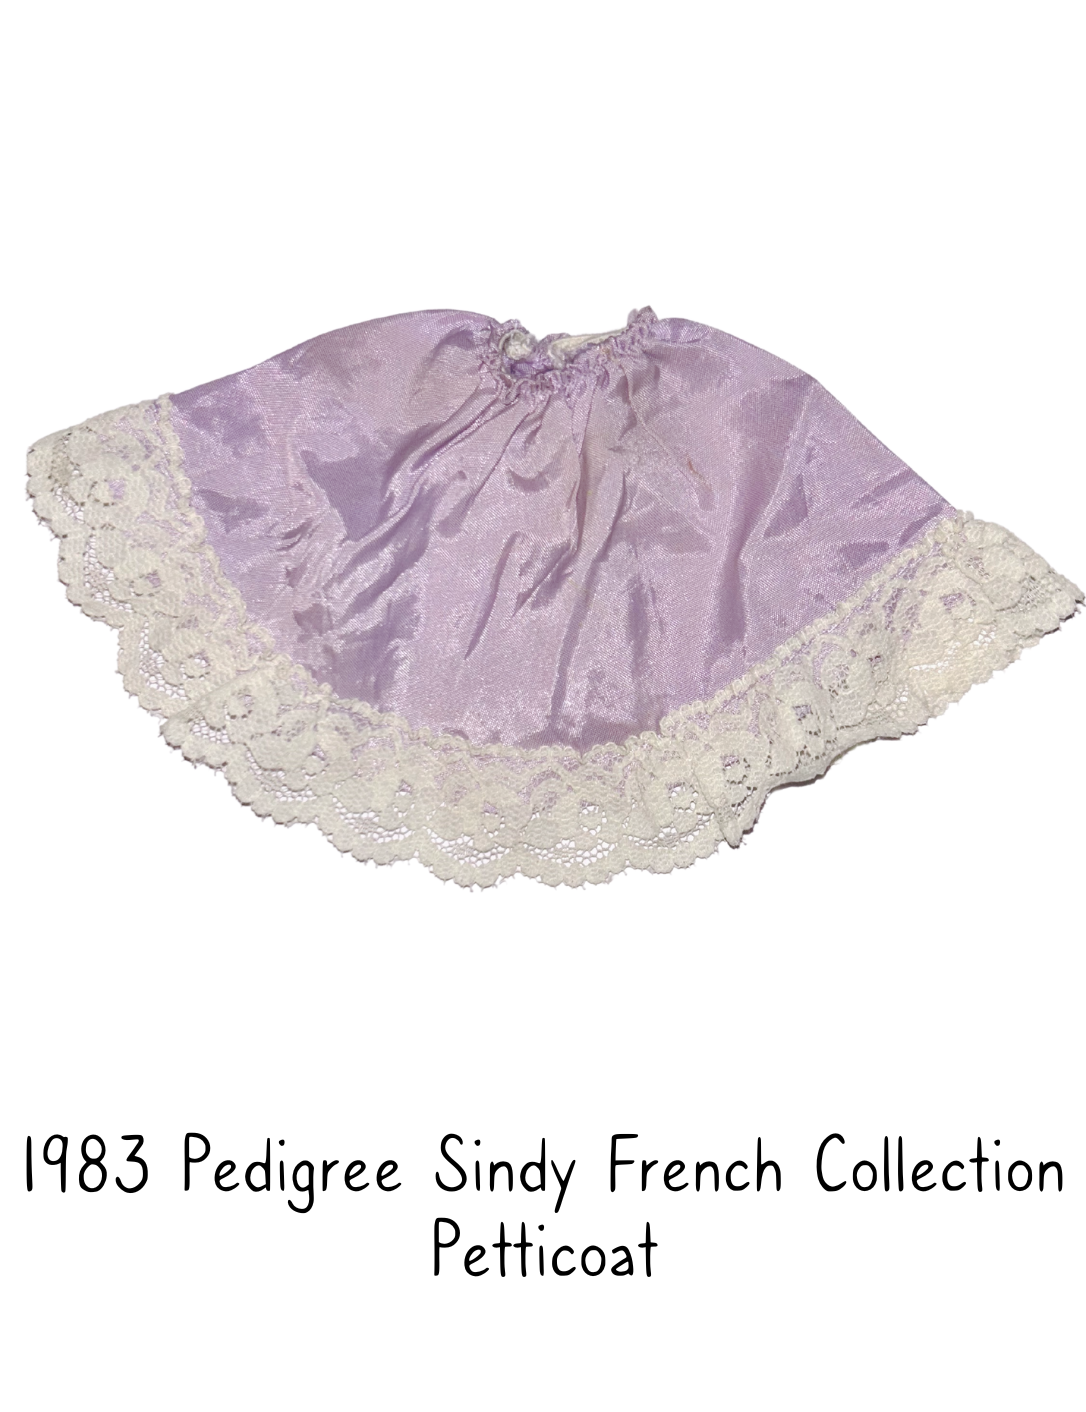 1983 Pedigree Sindy Fashion Doll French Collection Lingerie Petticoat